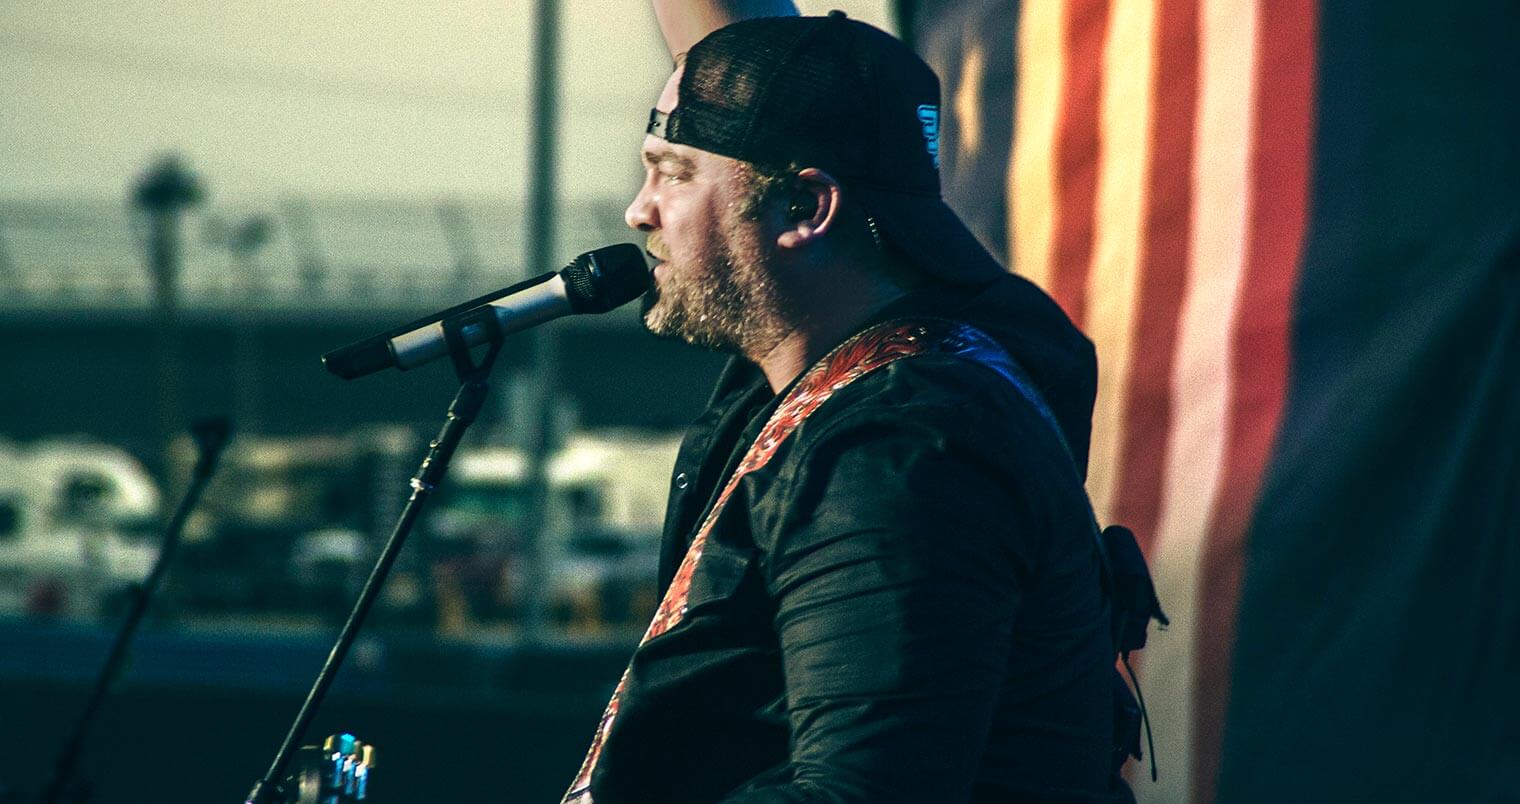 UV Vodka Partners with Country Star Lee Brice to Support Veterans, featured image